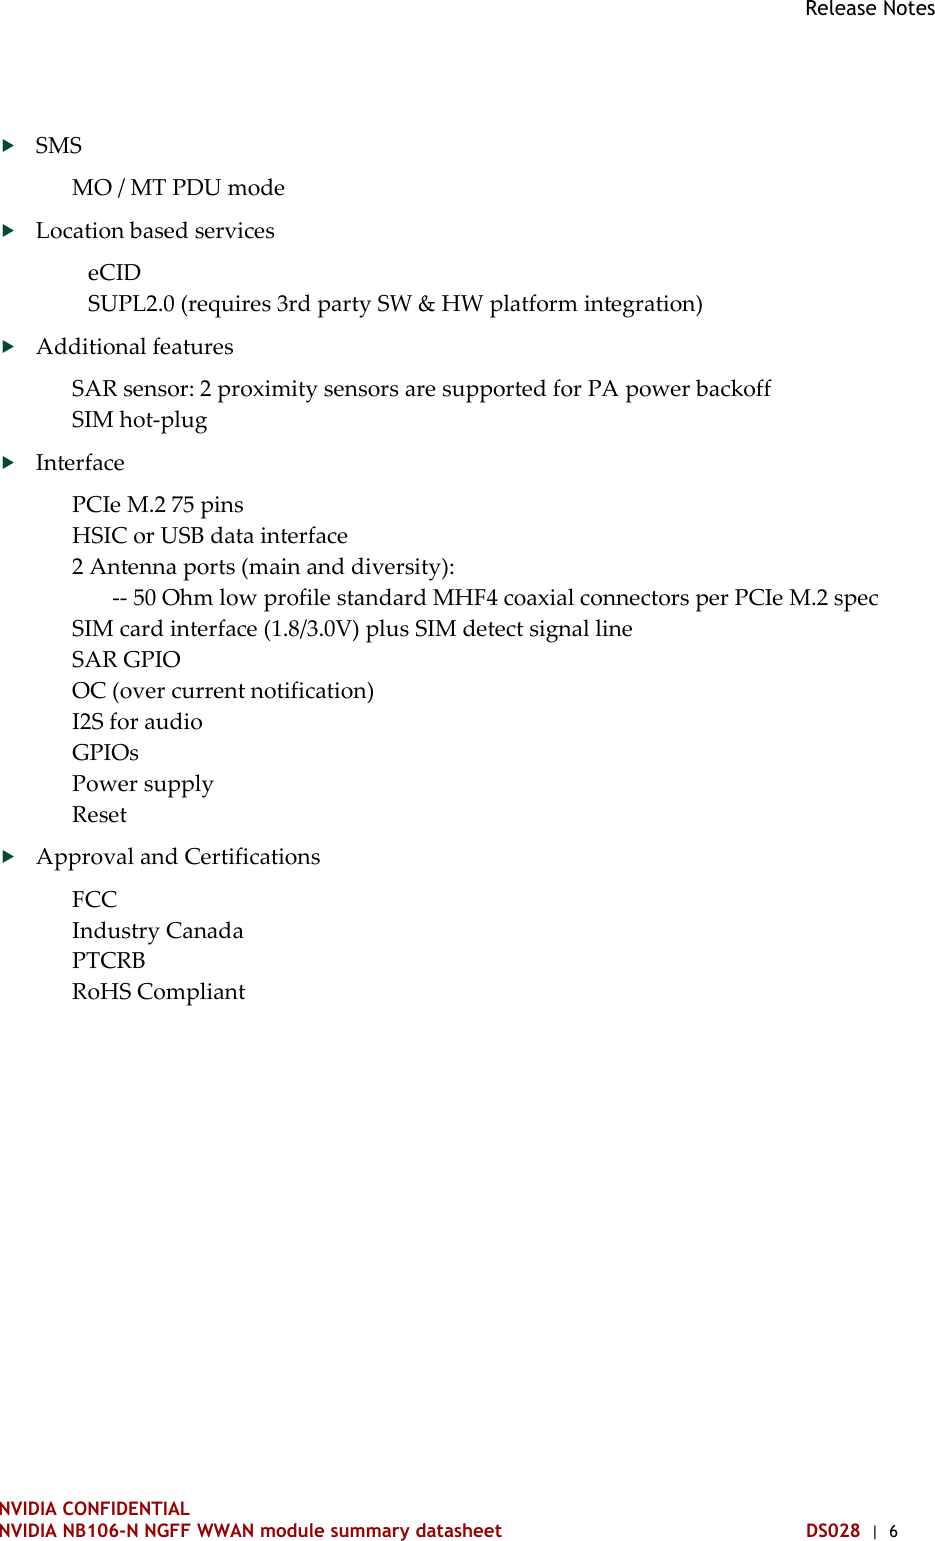 Release Notes   NVIDIA CONFIDENTIAL NVIDIA NB106-N NGFF WWAN module summary datasheet DS028  |  6  SMS MO / MT PDU mode  Location based services eCID SUPL2.0 (requires 3rd party SW &amp; HW platform integration)  Additional features SAR sensor: 2 proximity sensors are supported for PA power backoff SIM hot-plug  Interface PCIe M.2 75 pins HSIC or USB data interface 2 Antenna ports (main and diversity):        -- 50 Ohm low profile standard MHF4 coaxial connectors per PCIe M.2 spec SIM card interface (1.8/3.0V) plus SIM detect signal line SAR GPIO OC (over current notification) I2S for audio GPIOs Power supply Reset  Approval and Certifications FCC Industry Canada PTCRB RoHS Compliant   